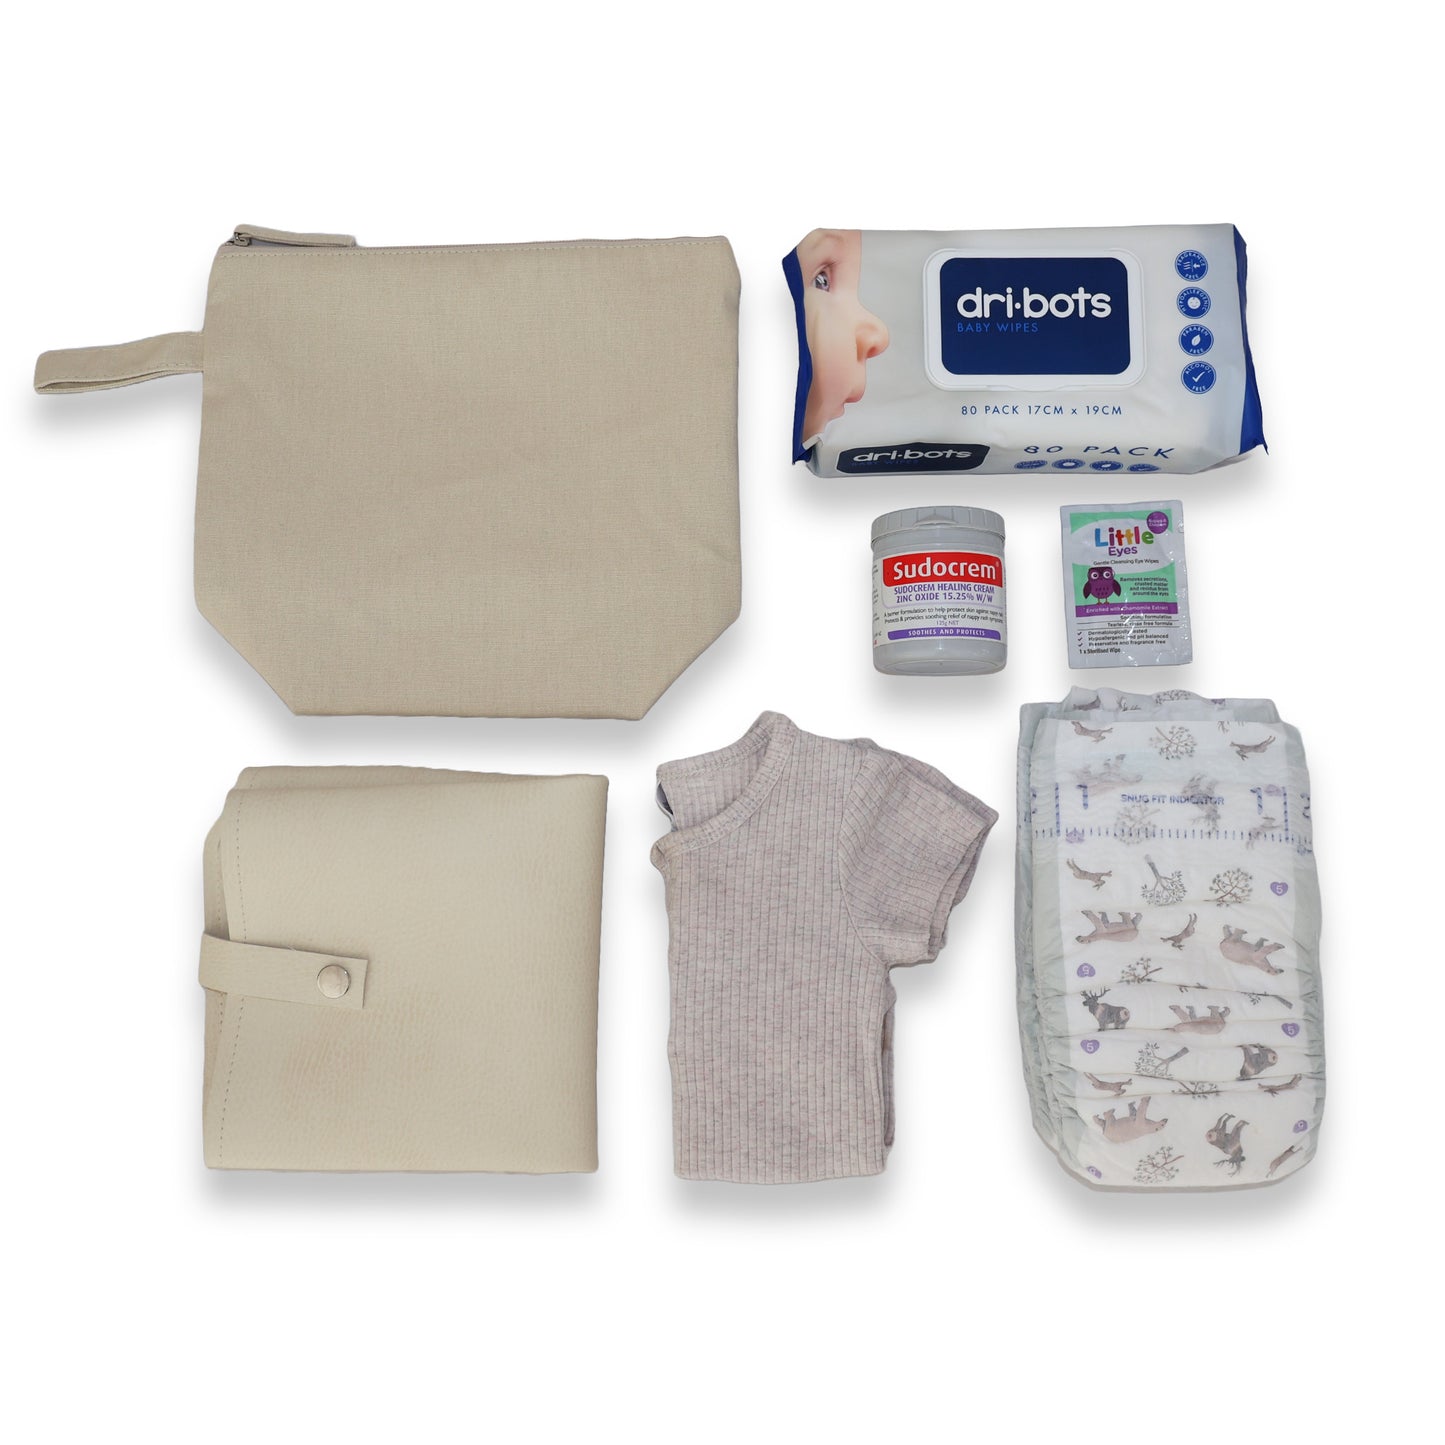 What fits in our nappy change pod you ask? We have wet wipes, 3 nappies, our change mat, spare onzie, sudo crem and some some ither bits and pieces, winning!